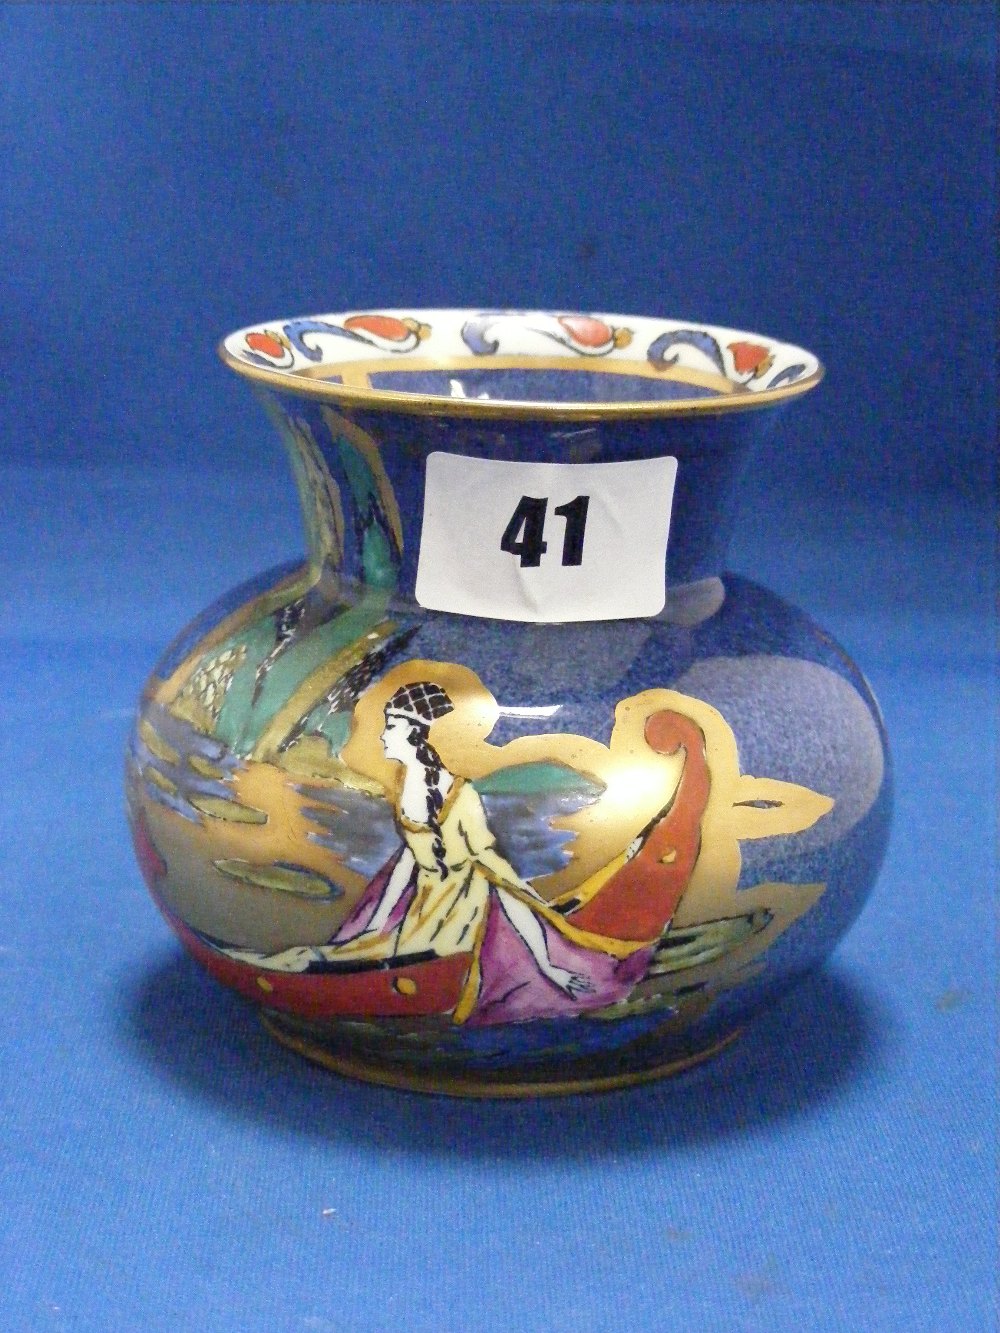 A Royal Cauldon vase entitled 'Blue Lagoon' and depicting a pre-Raphaelite maiden seated in a boat